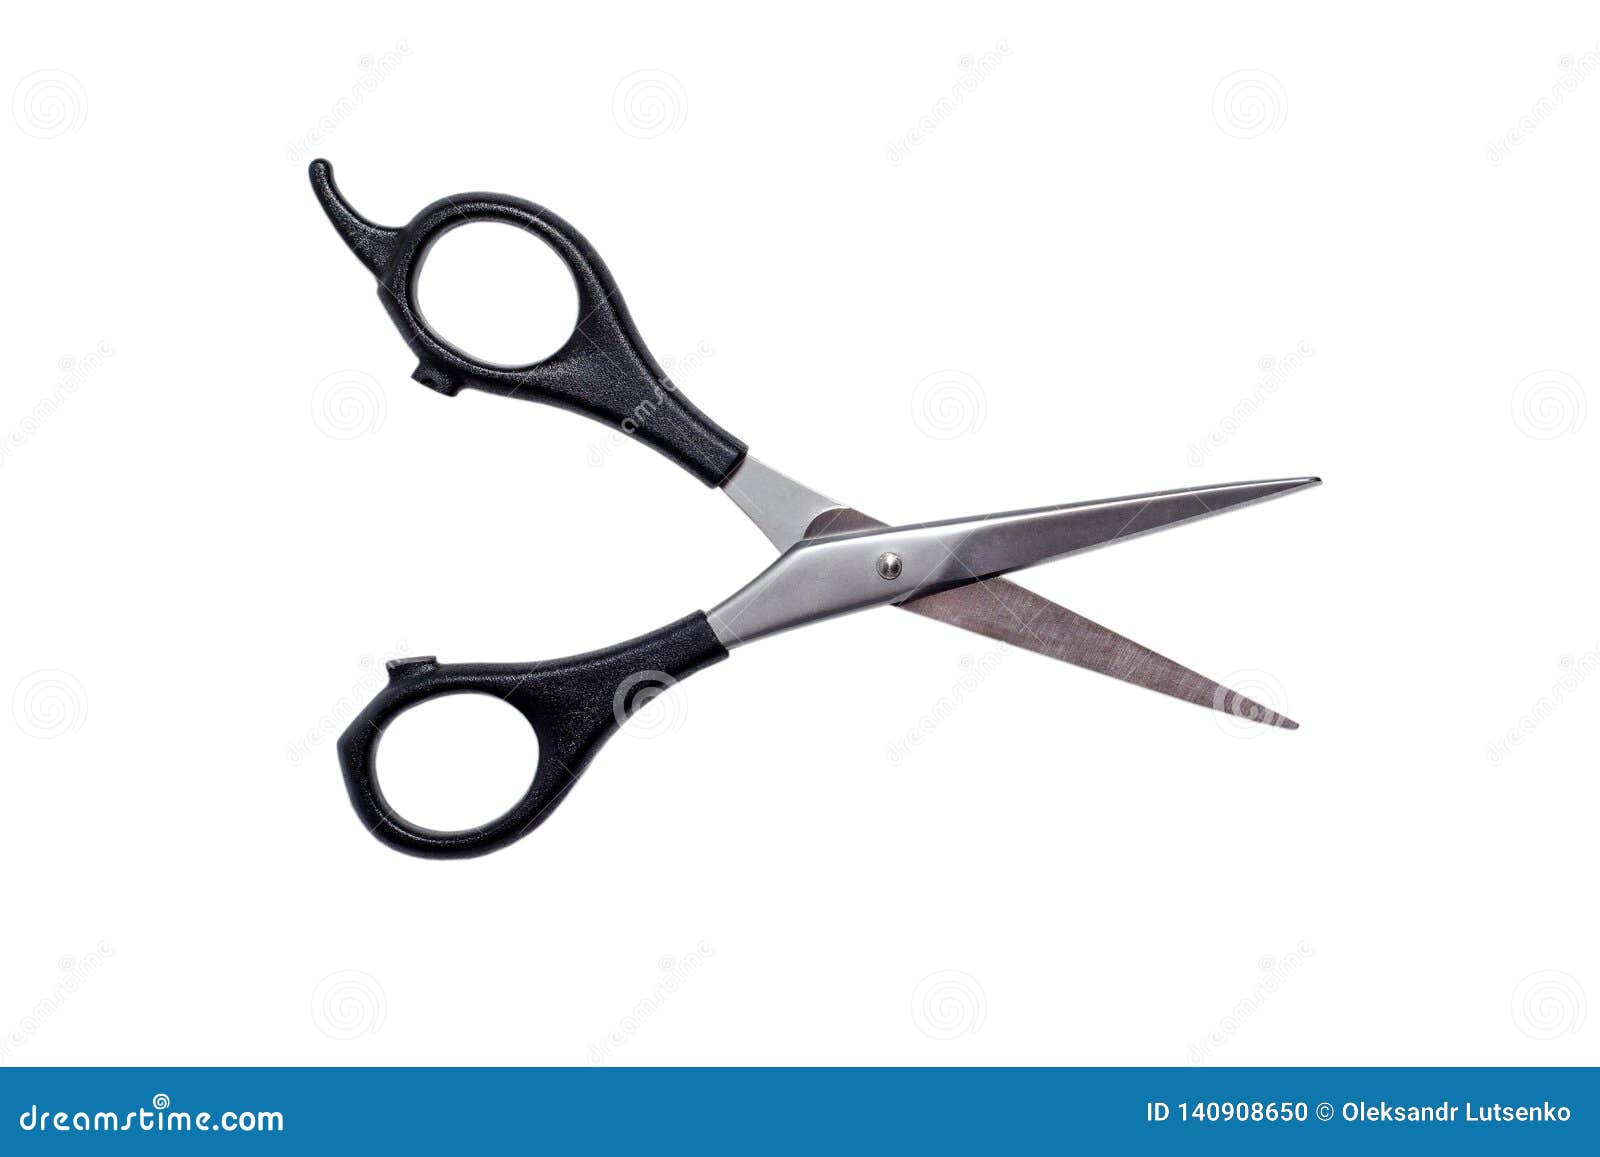 Hairdressers Scissors On White Background Stock Photo Image Of